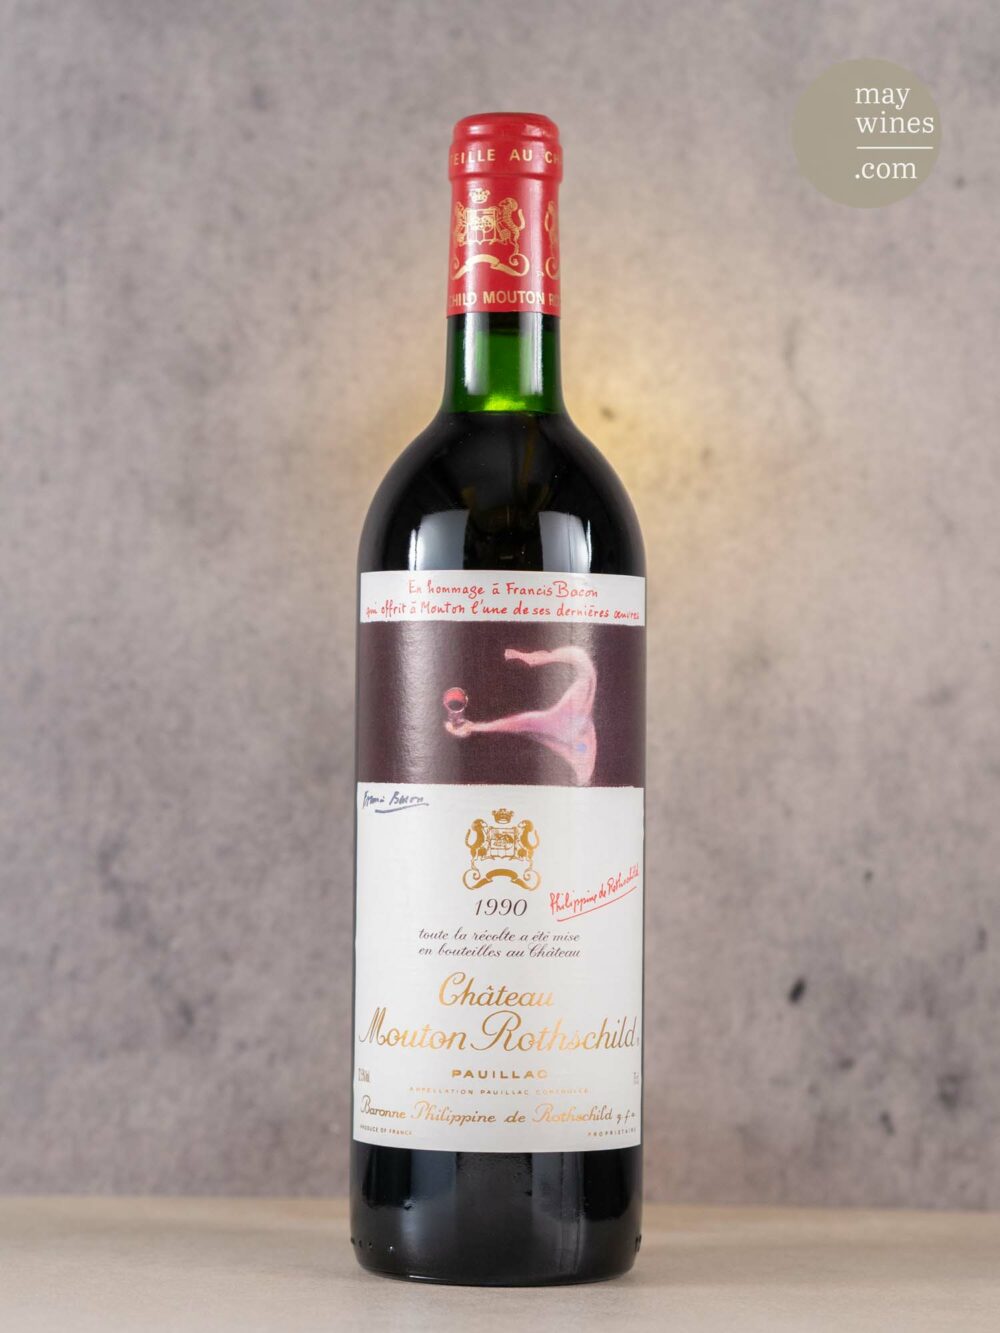 May Wines – Rotwein – 1990 Château Mouton Rothschild